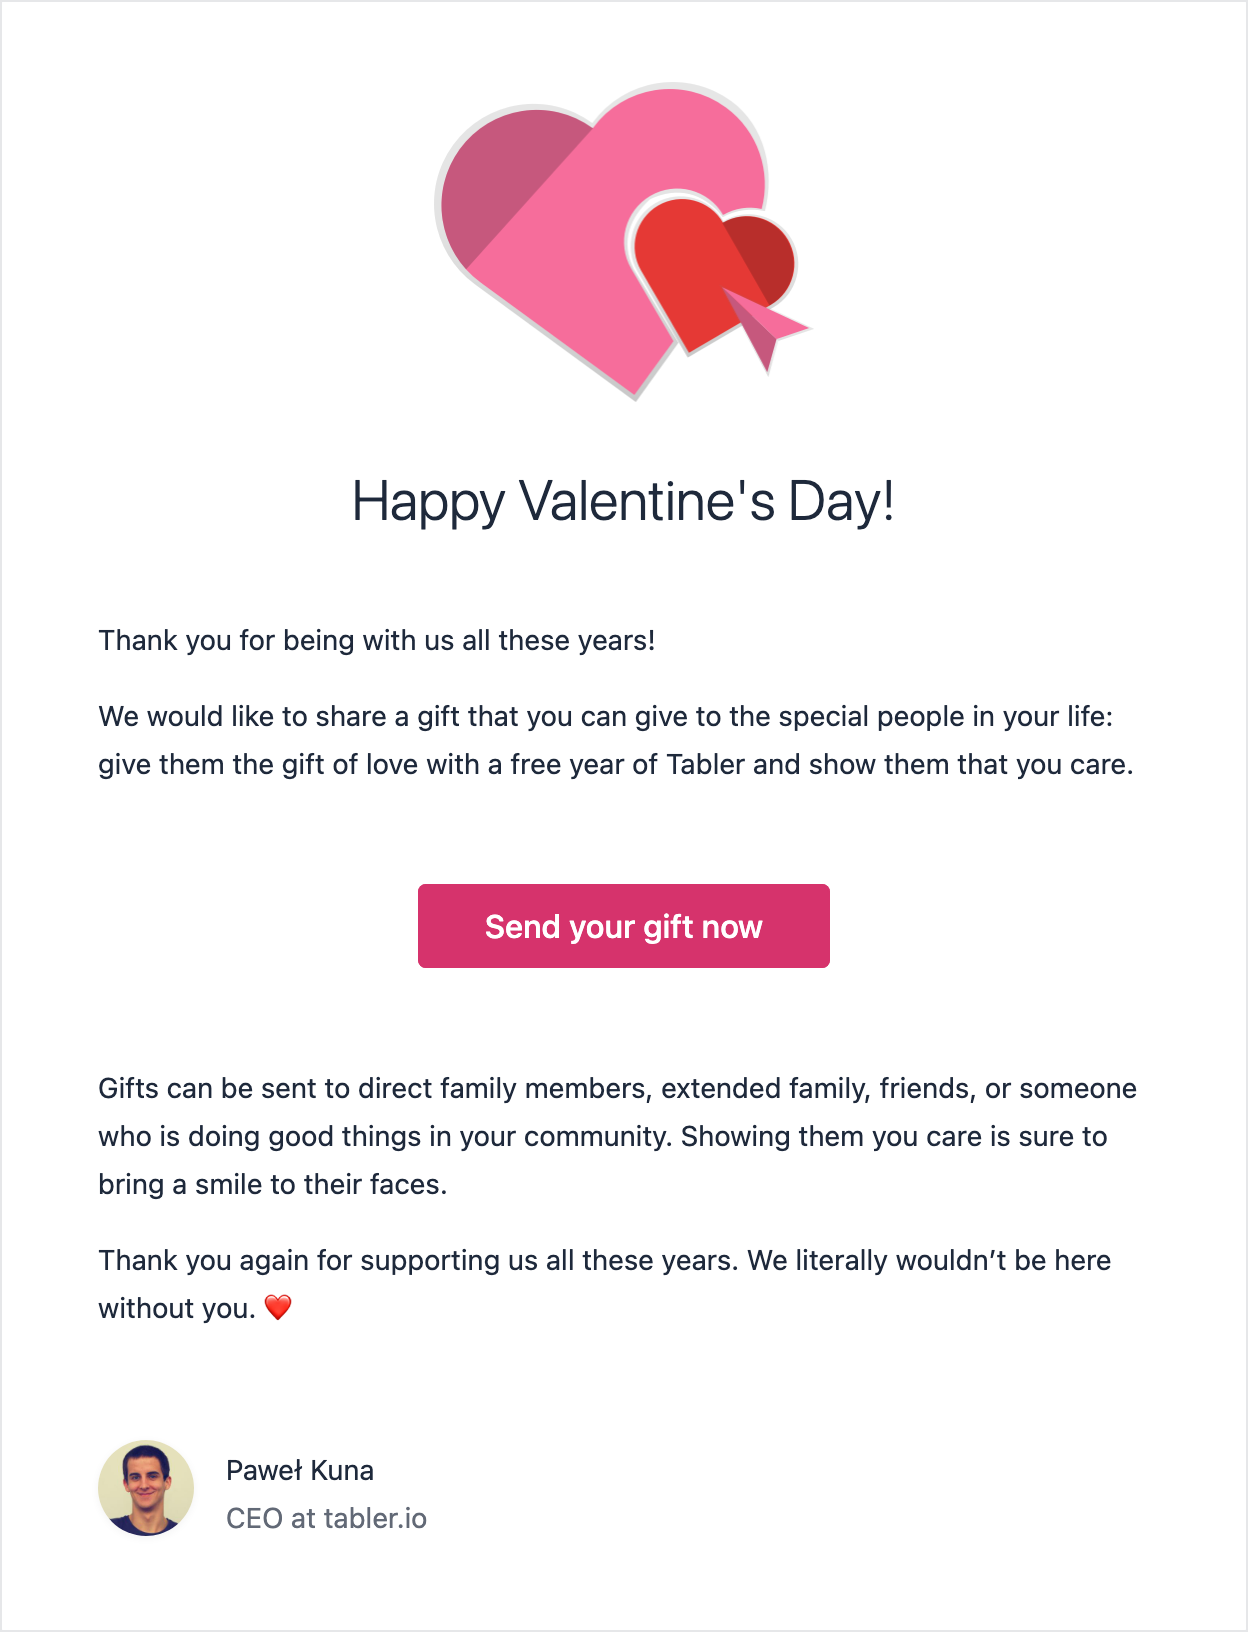 Email template for Valentine's Day 1